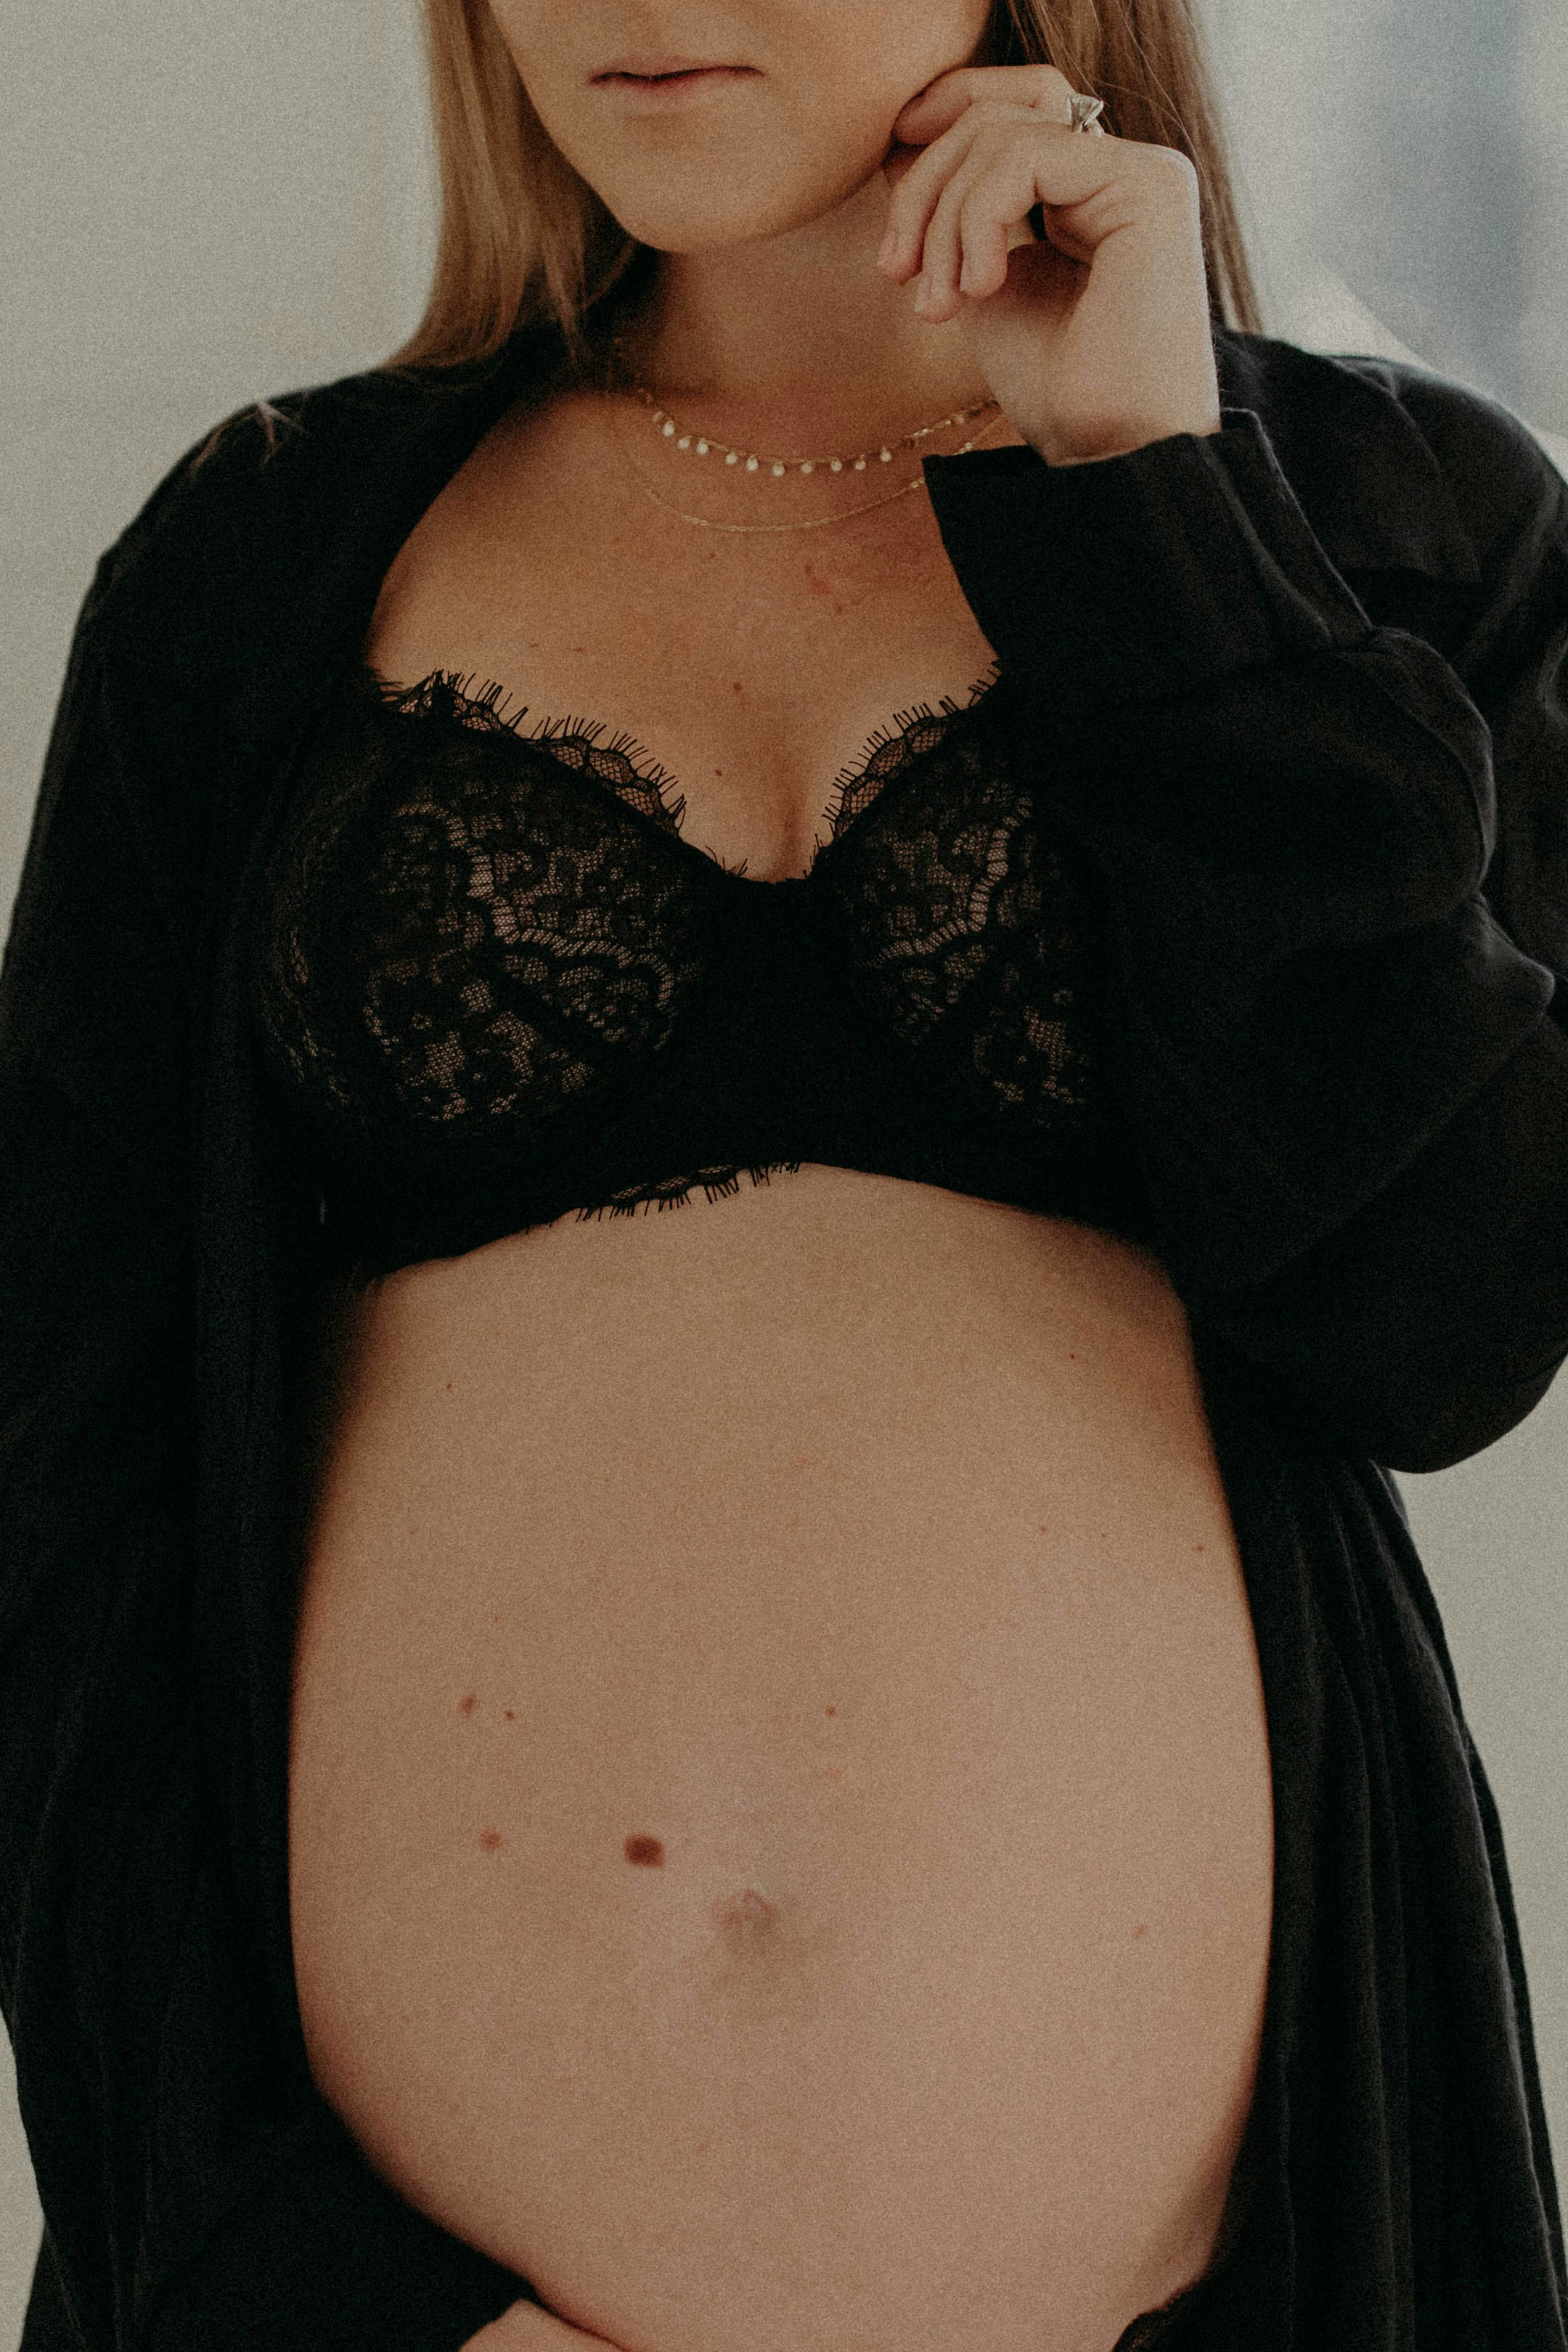 A pregnant woman in a black bra posing for a picture photo pic